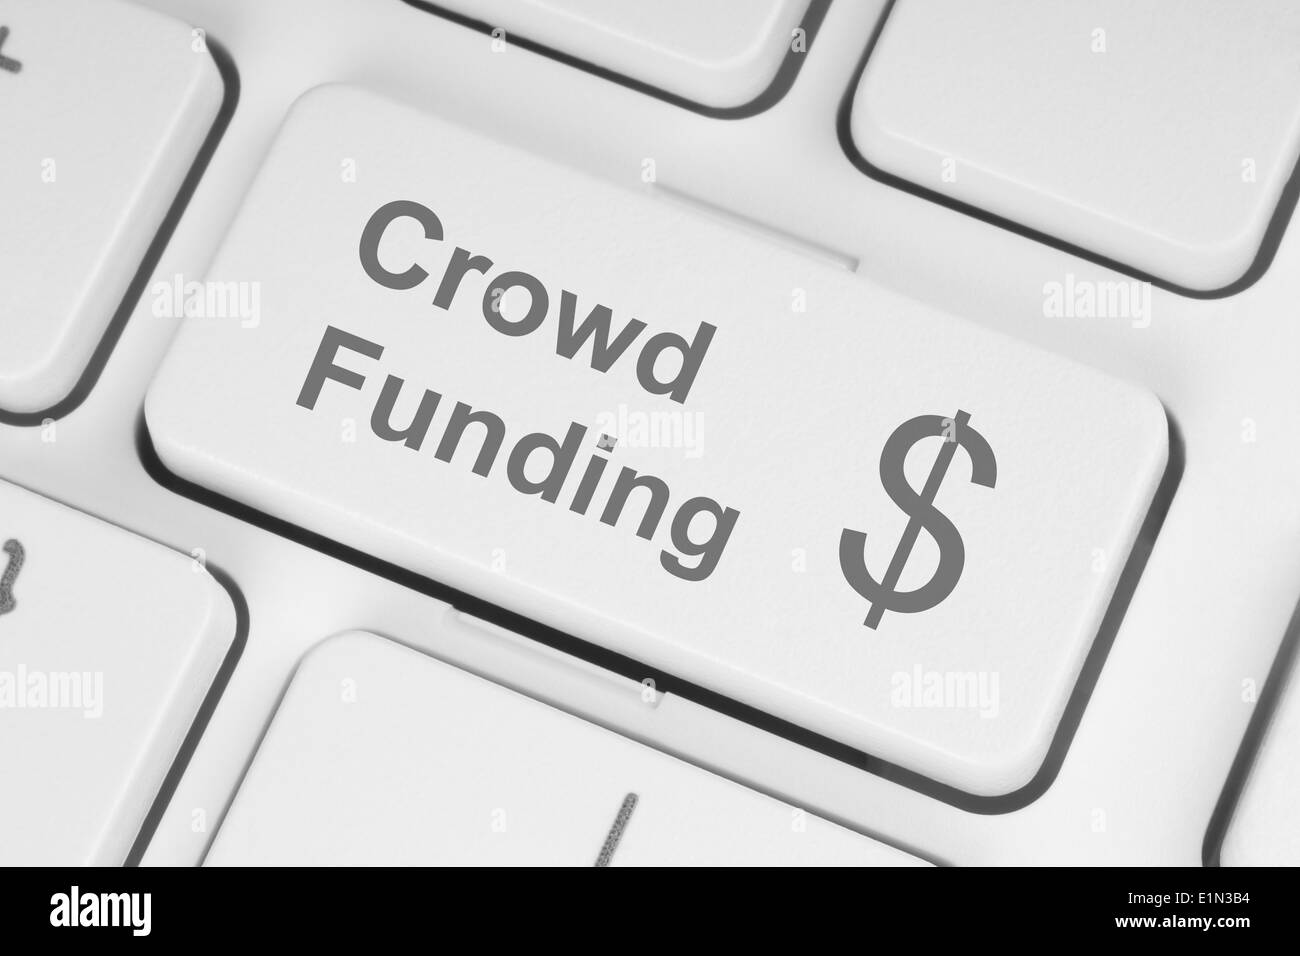 Crowd funding button on keyboard Stock Photo